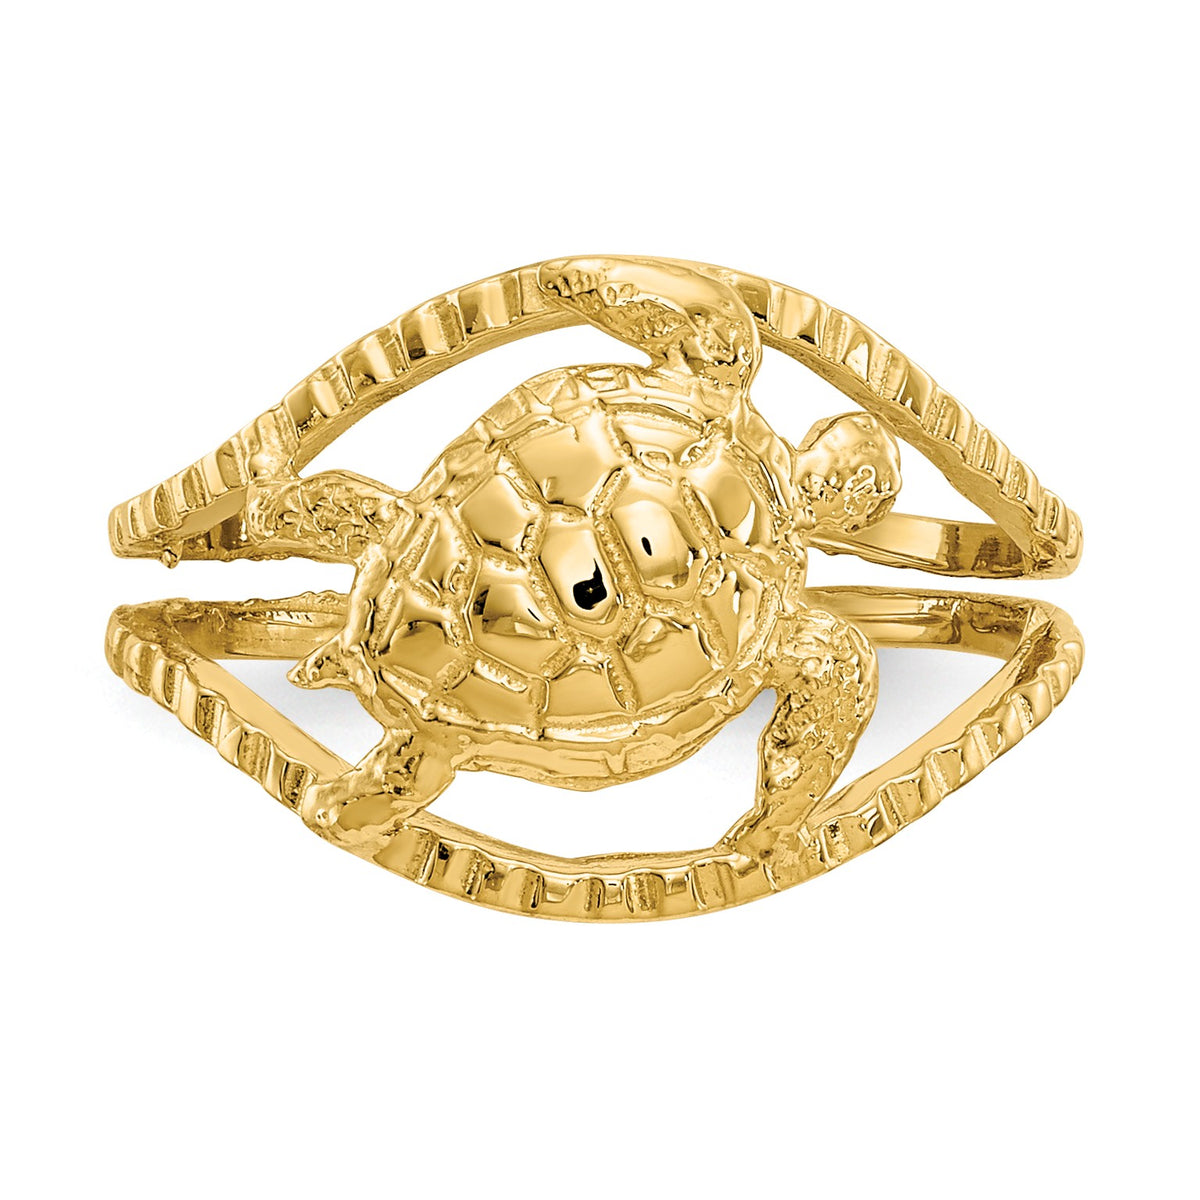 Alternate view of the Sea Turtle Toe Ring in 14K Yellow Gold by The Black Bow Jewelry Co.